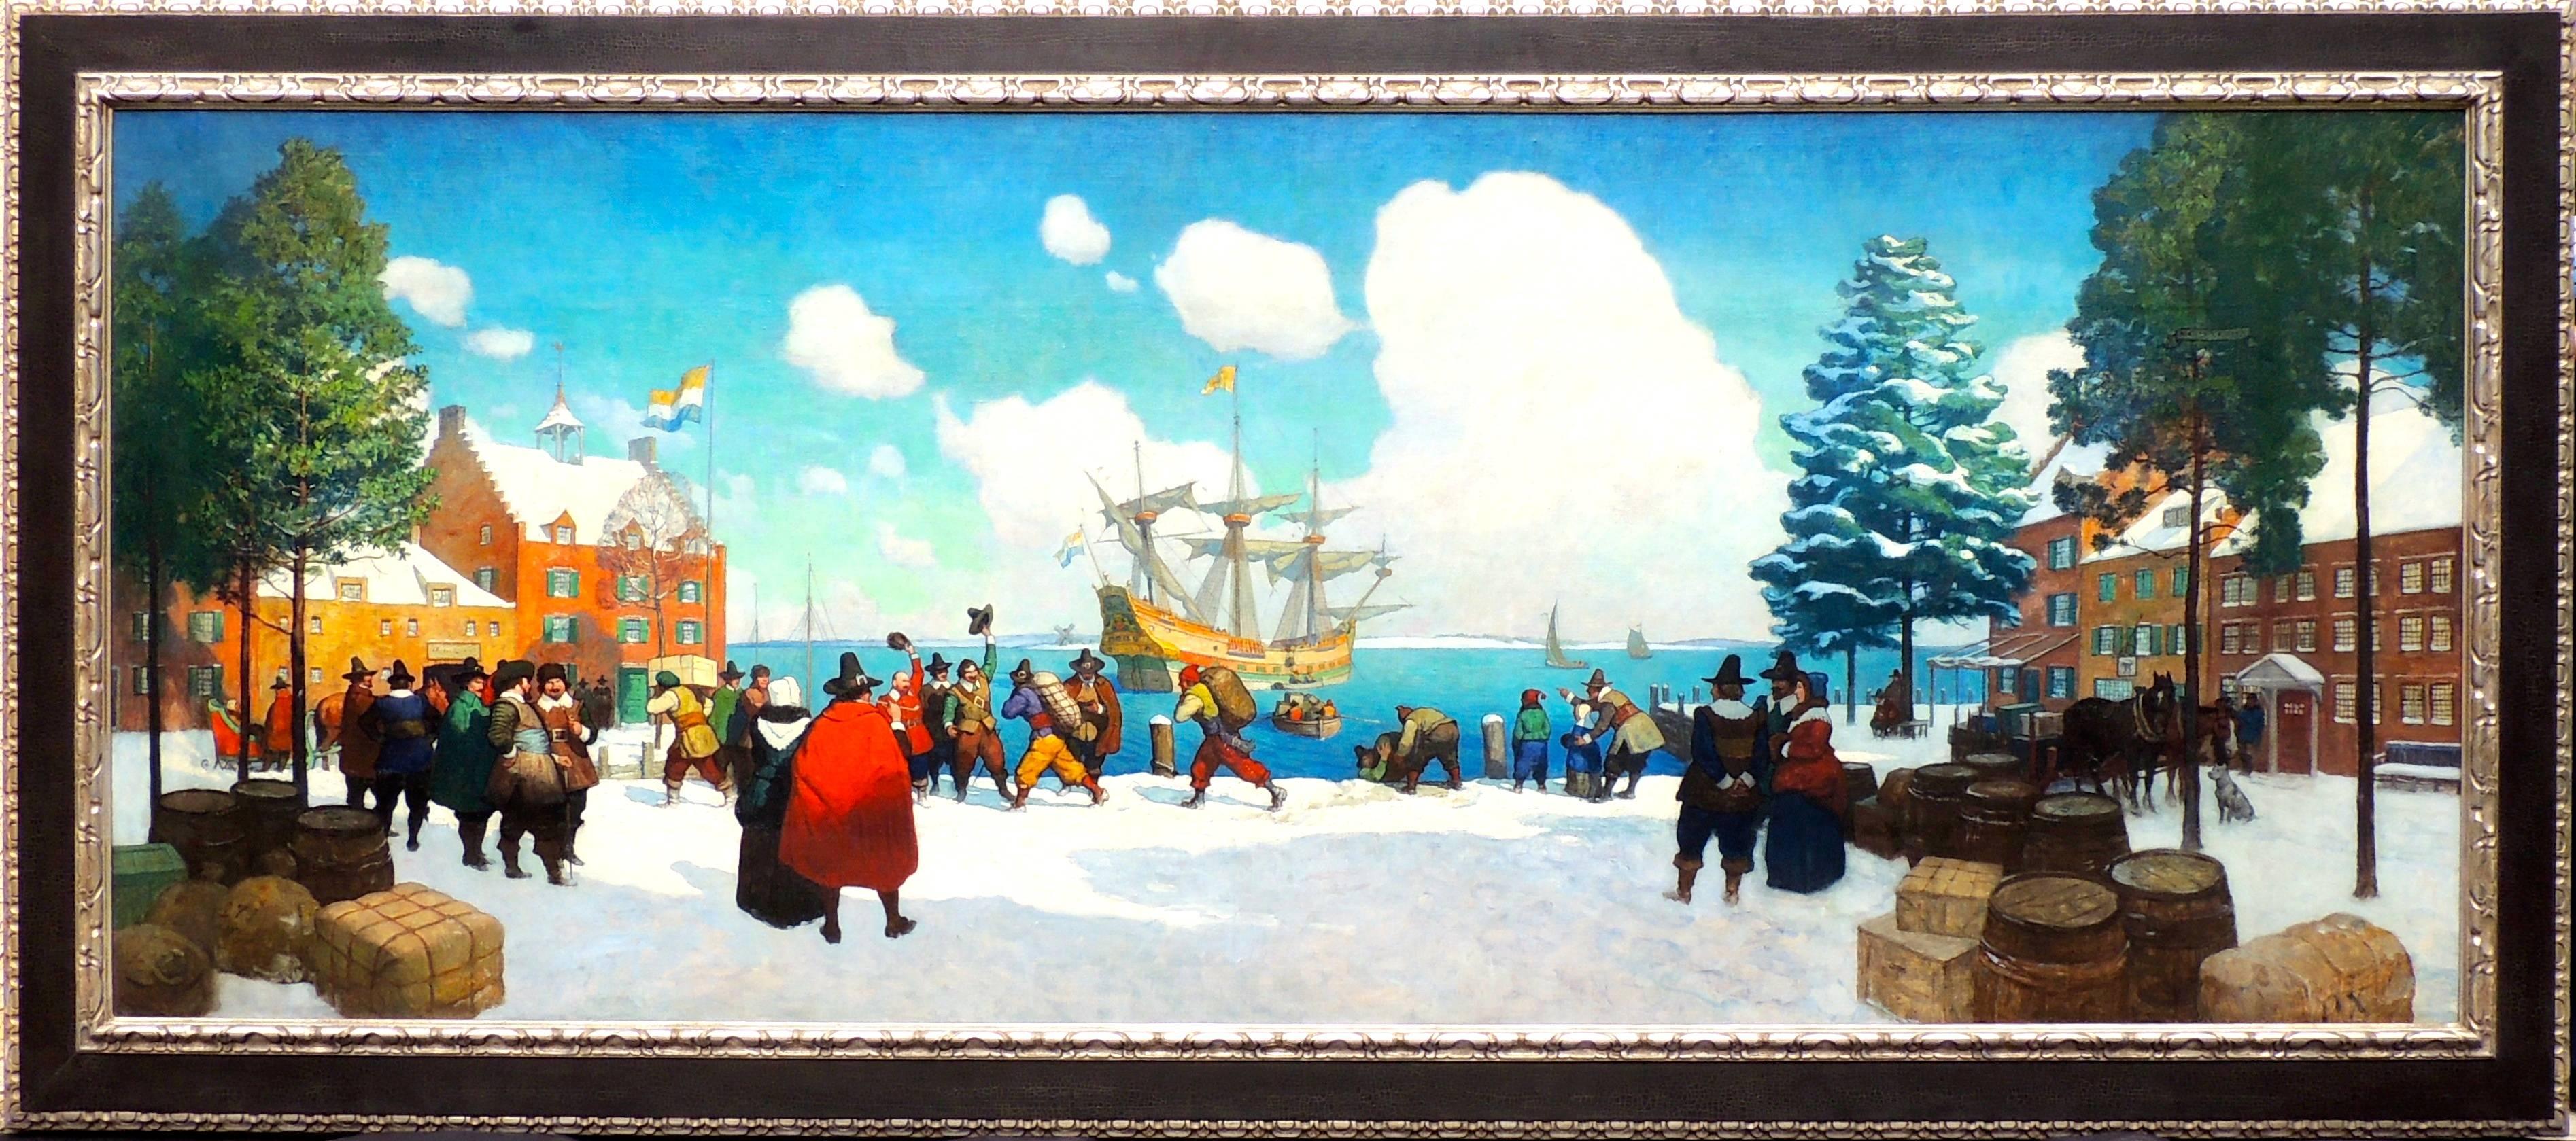 The Christmas Ship in Old New York - Painting by Newell Convers Wyeth